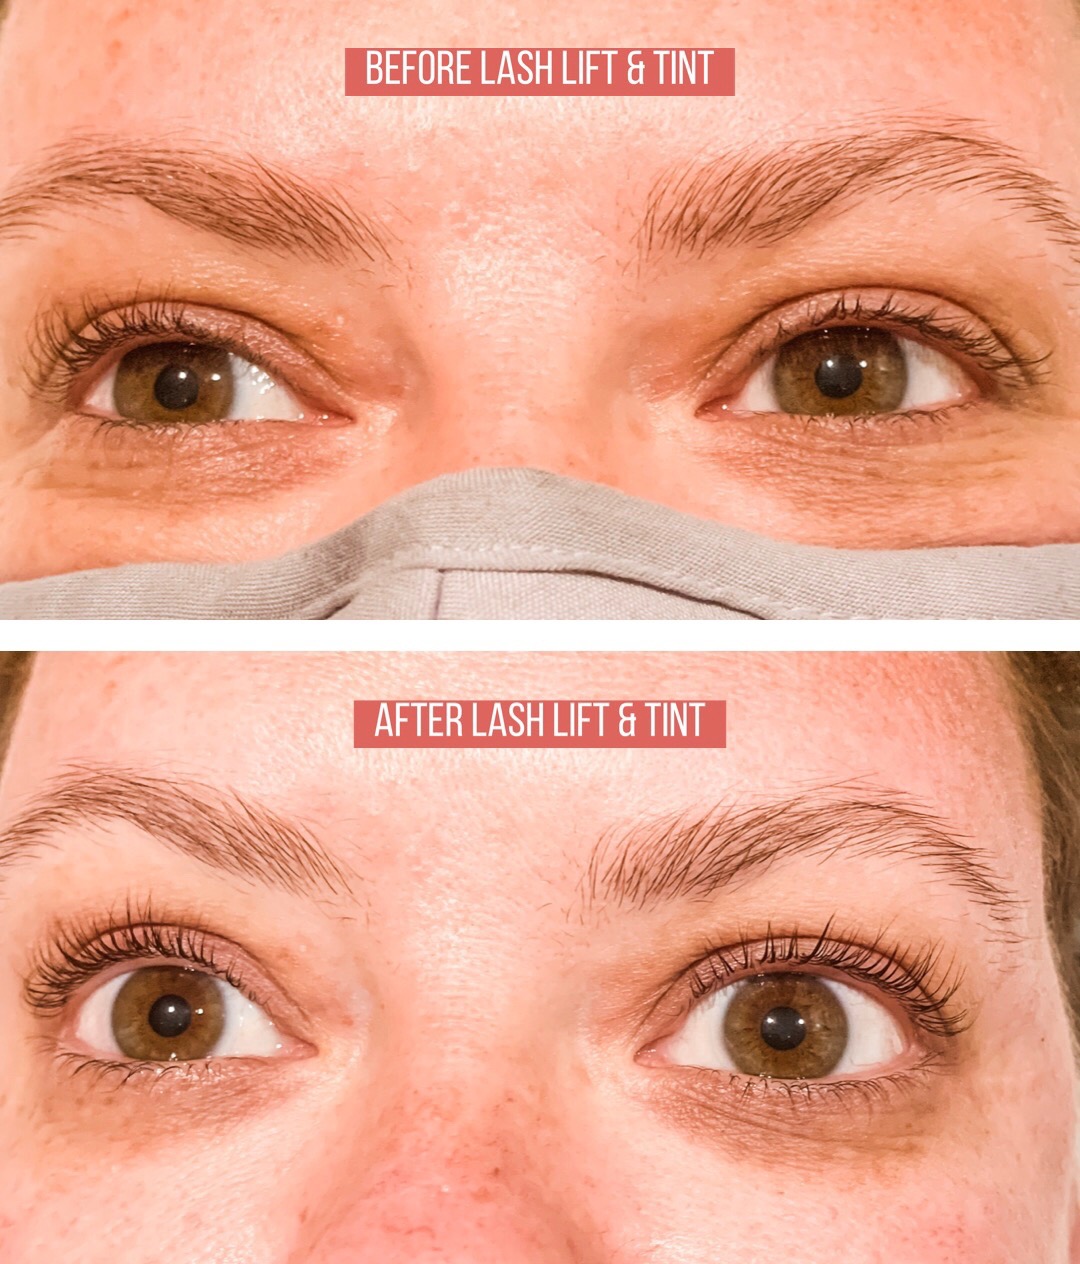 Before and after lash lift